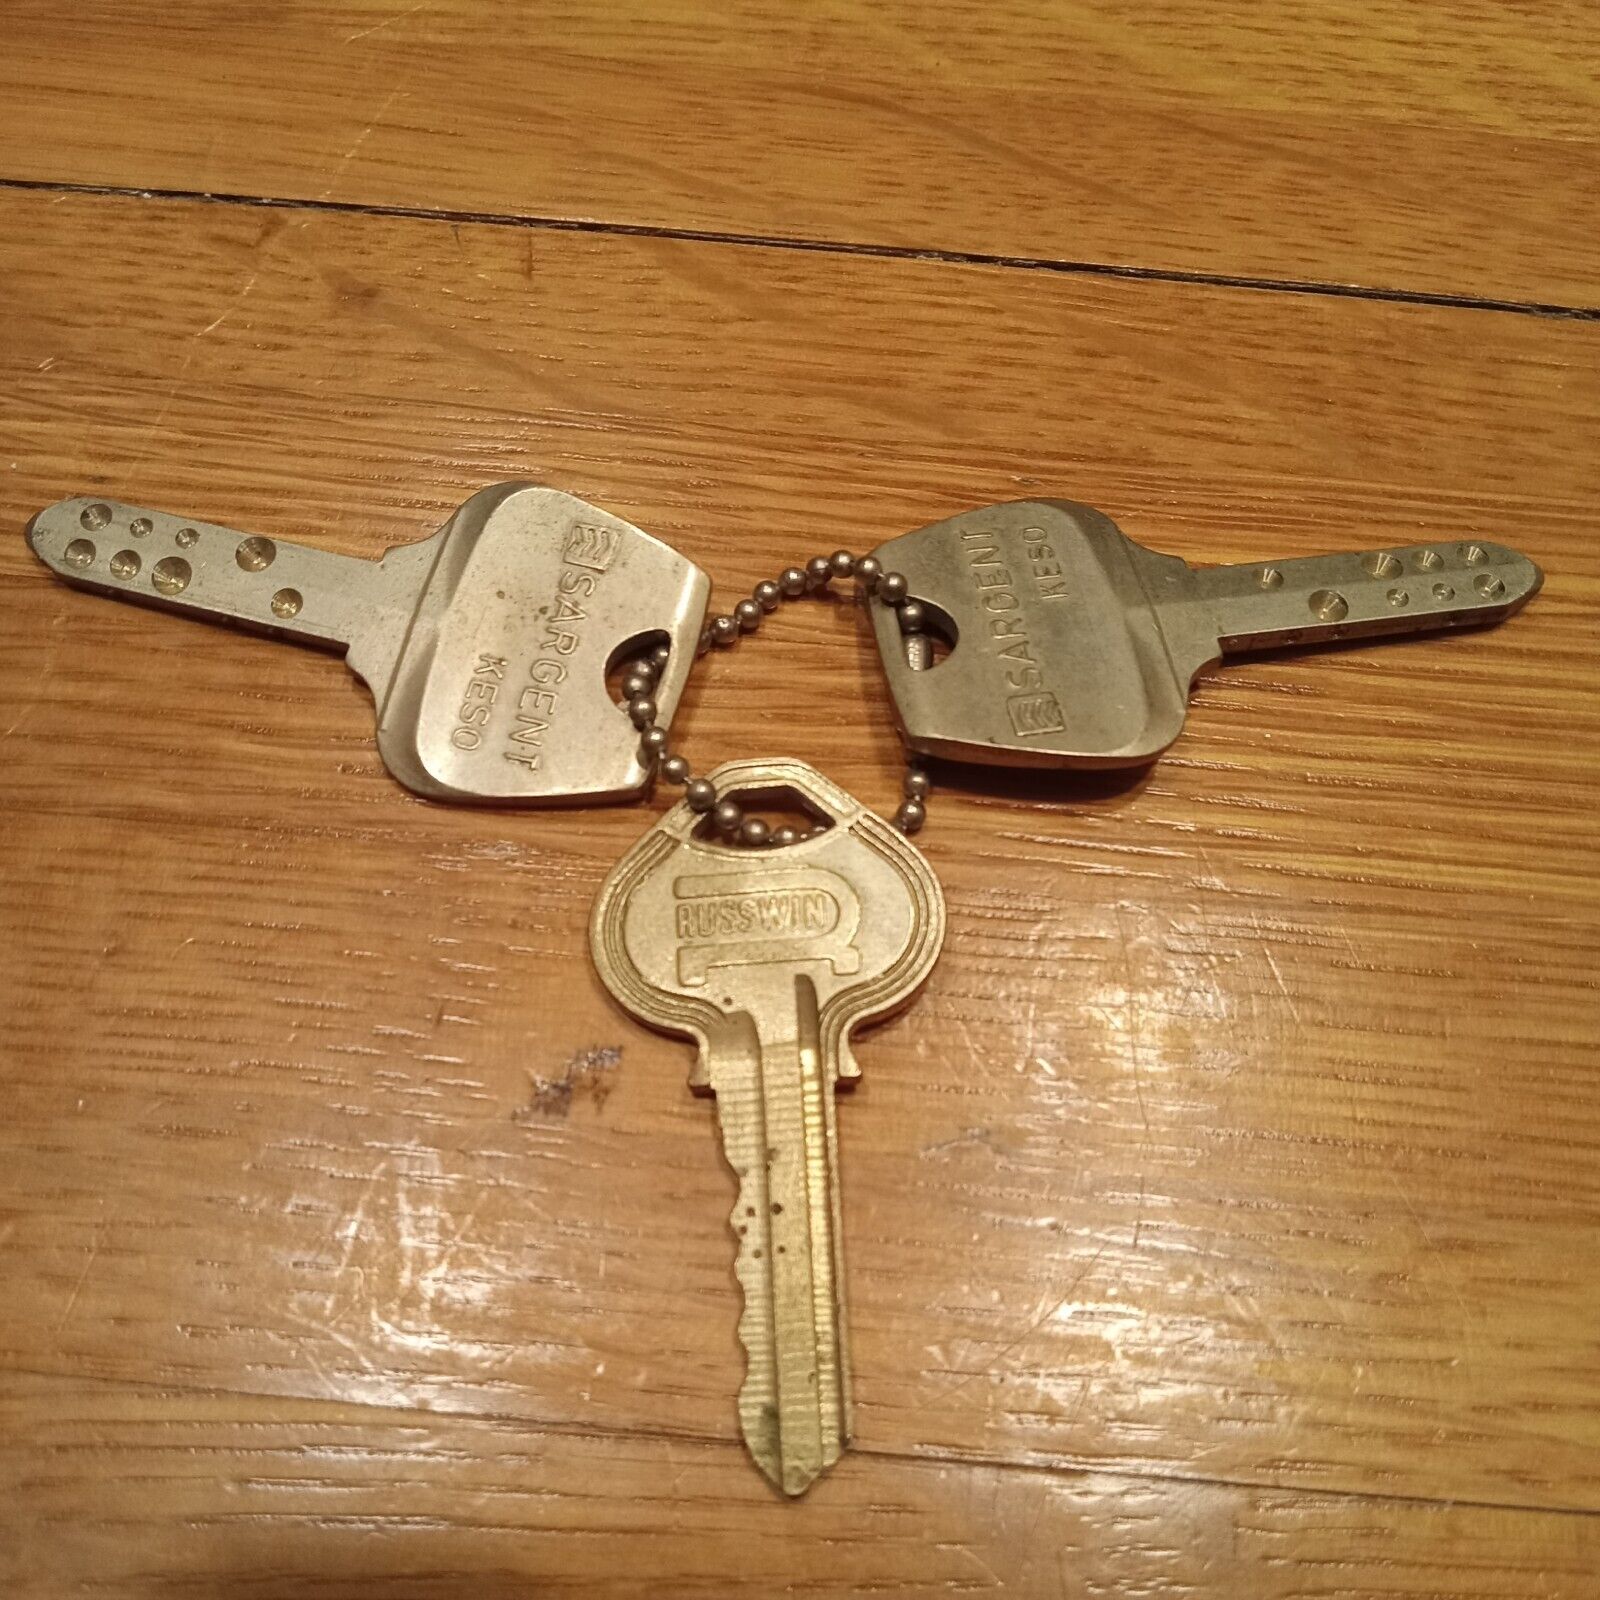 2-Sargent KESO High Security Dimple Keys Swiss Made In Switzerland + Russwin Key